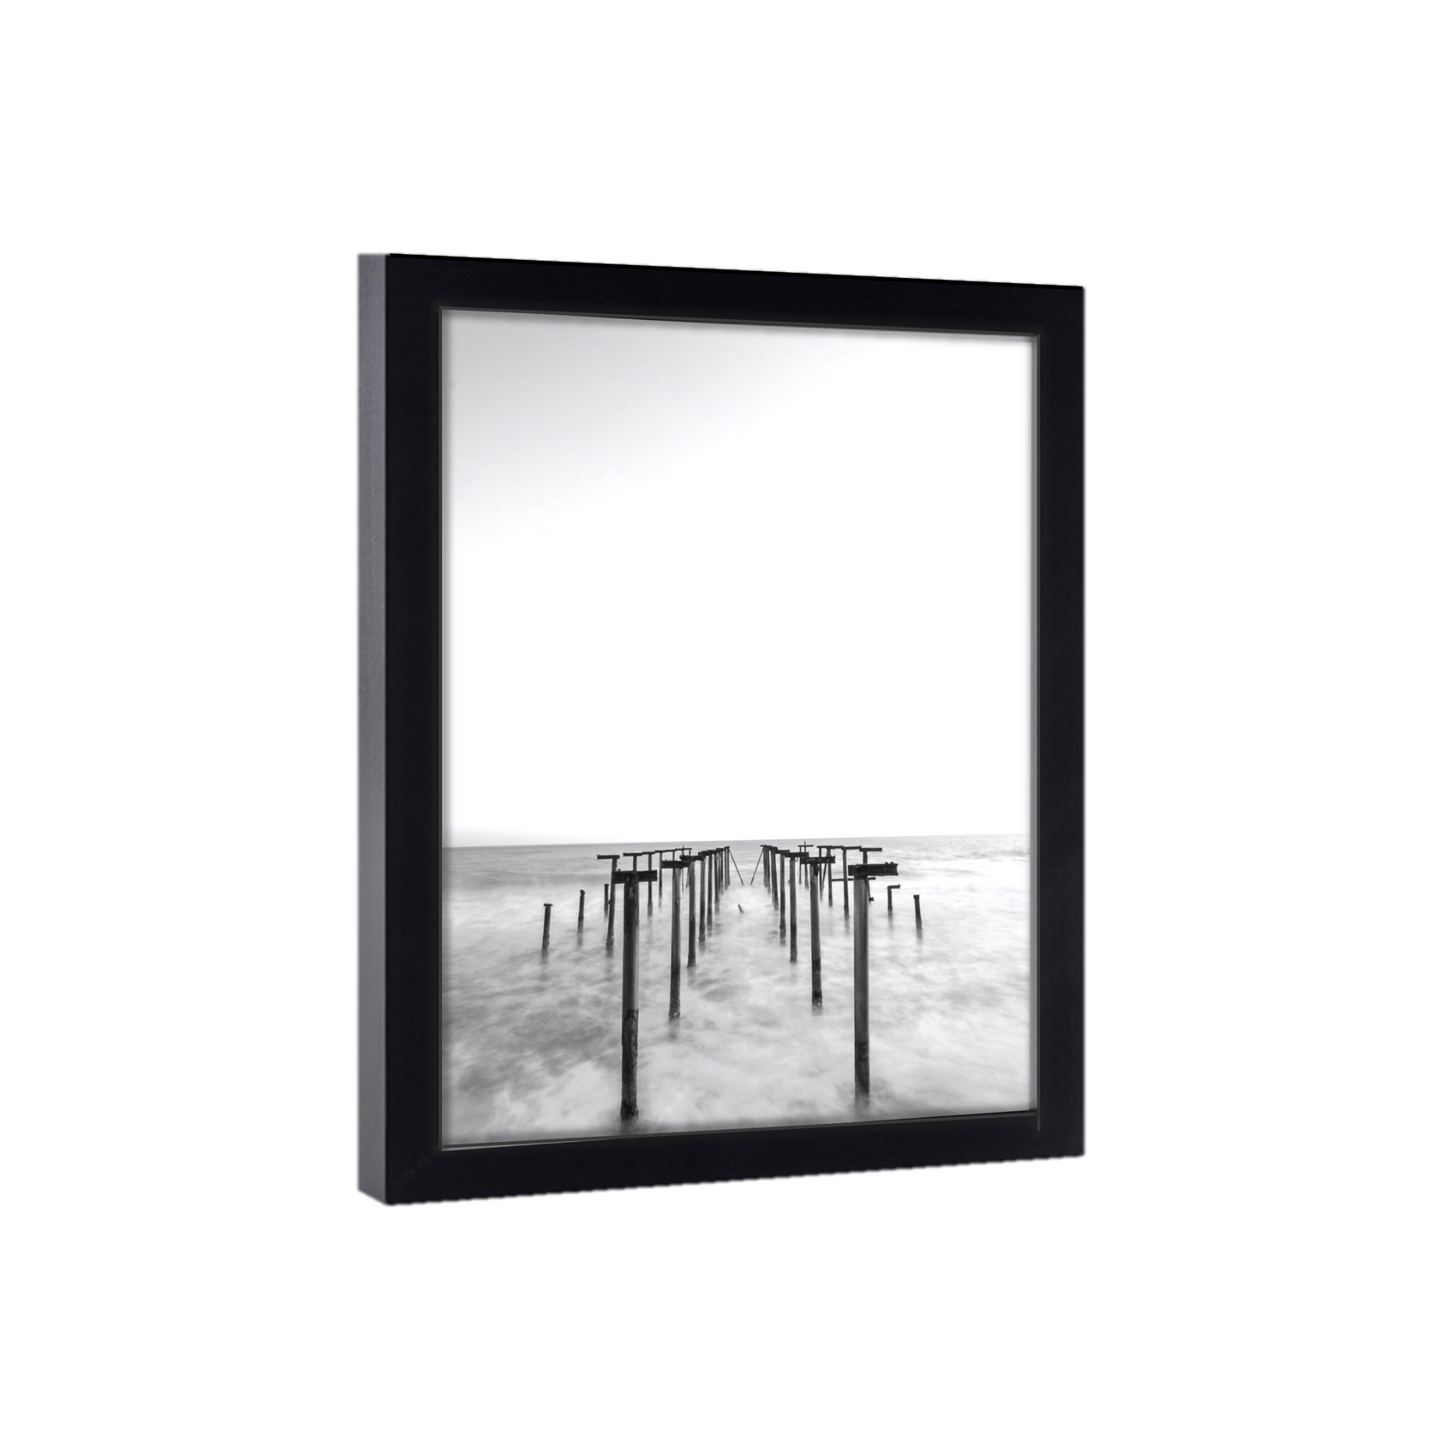 Gallery Wall 23x42 Picture Frame Black Wood 23x42  Poster Size